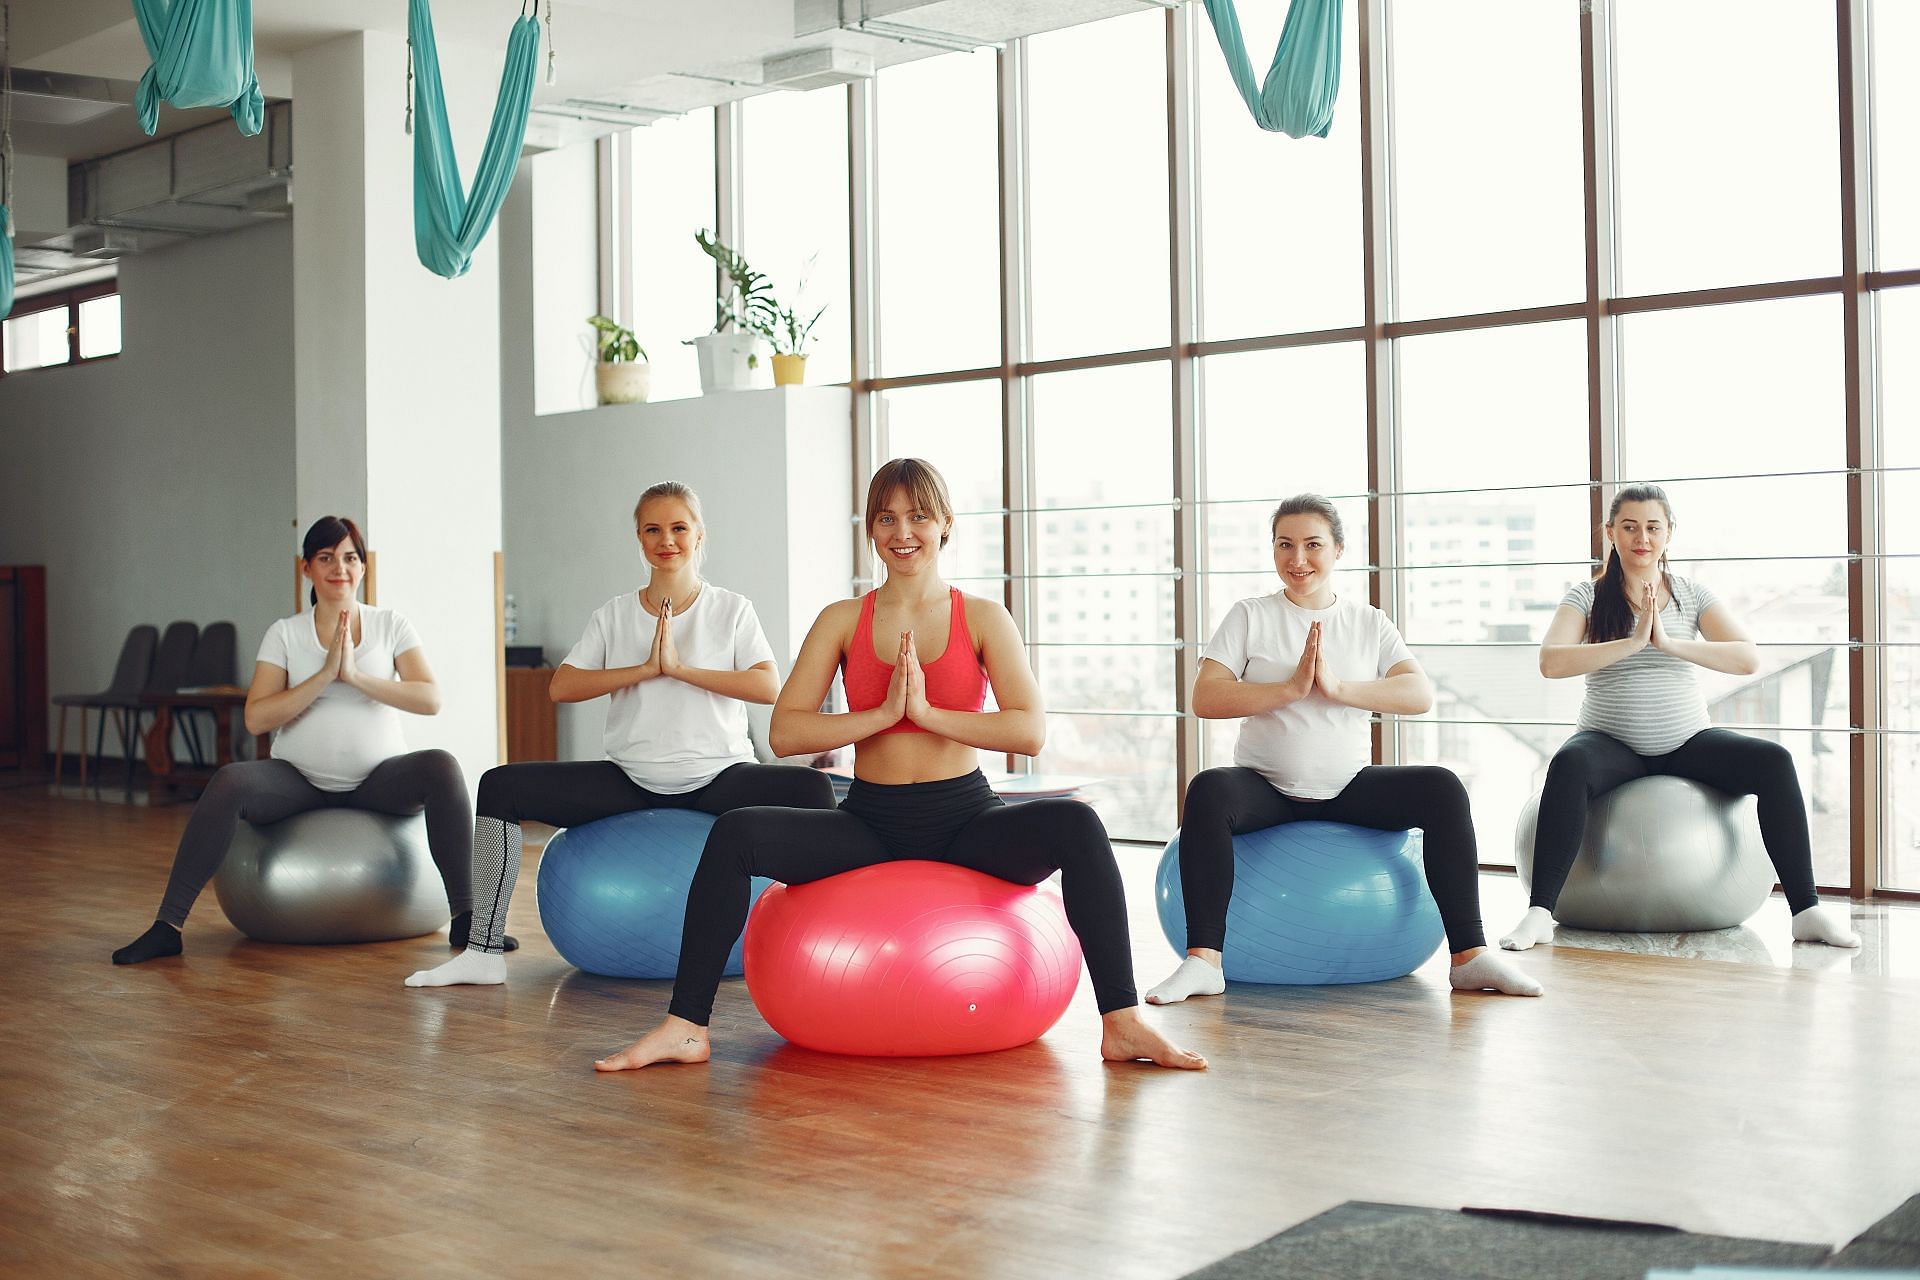 Yoga ball exercises can be a fun way to challenge yourself (Image via Pexels @Gustavo Fring)